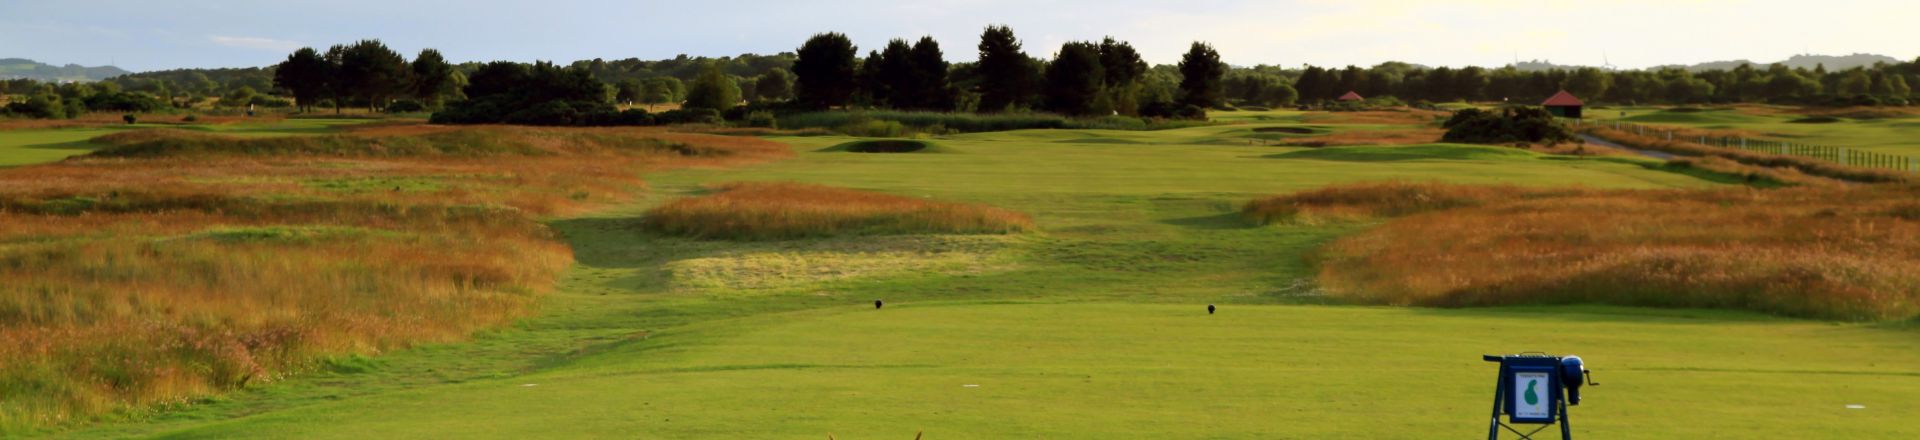 The Carnoustie Buddon Course at Carnoustie Golf Links